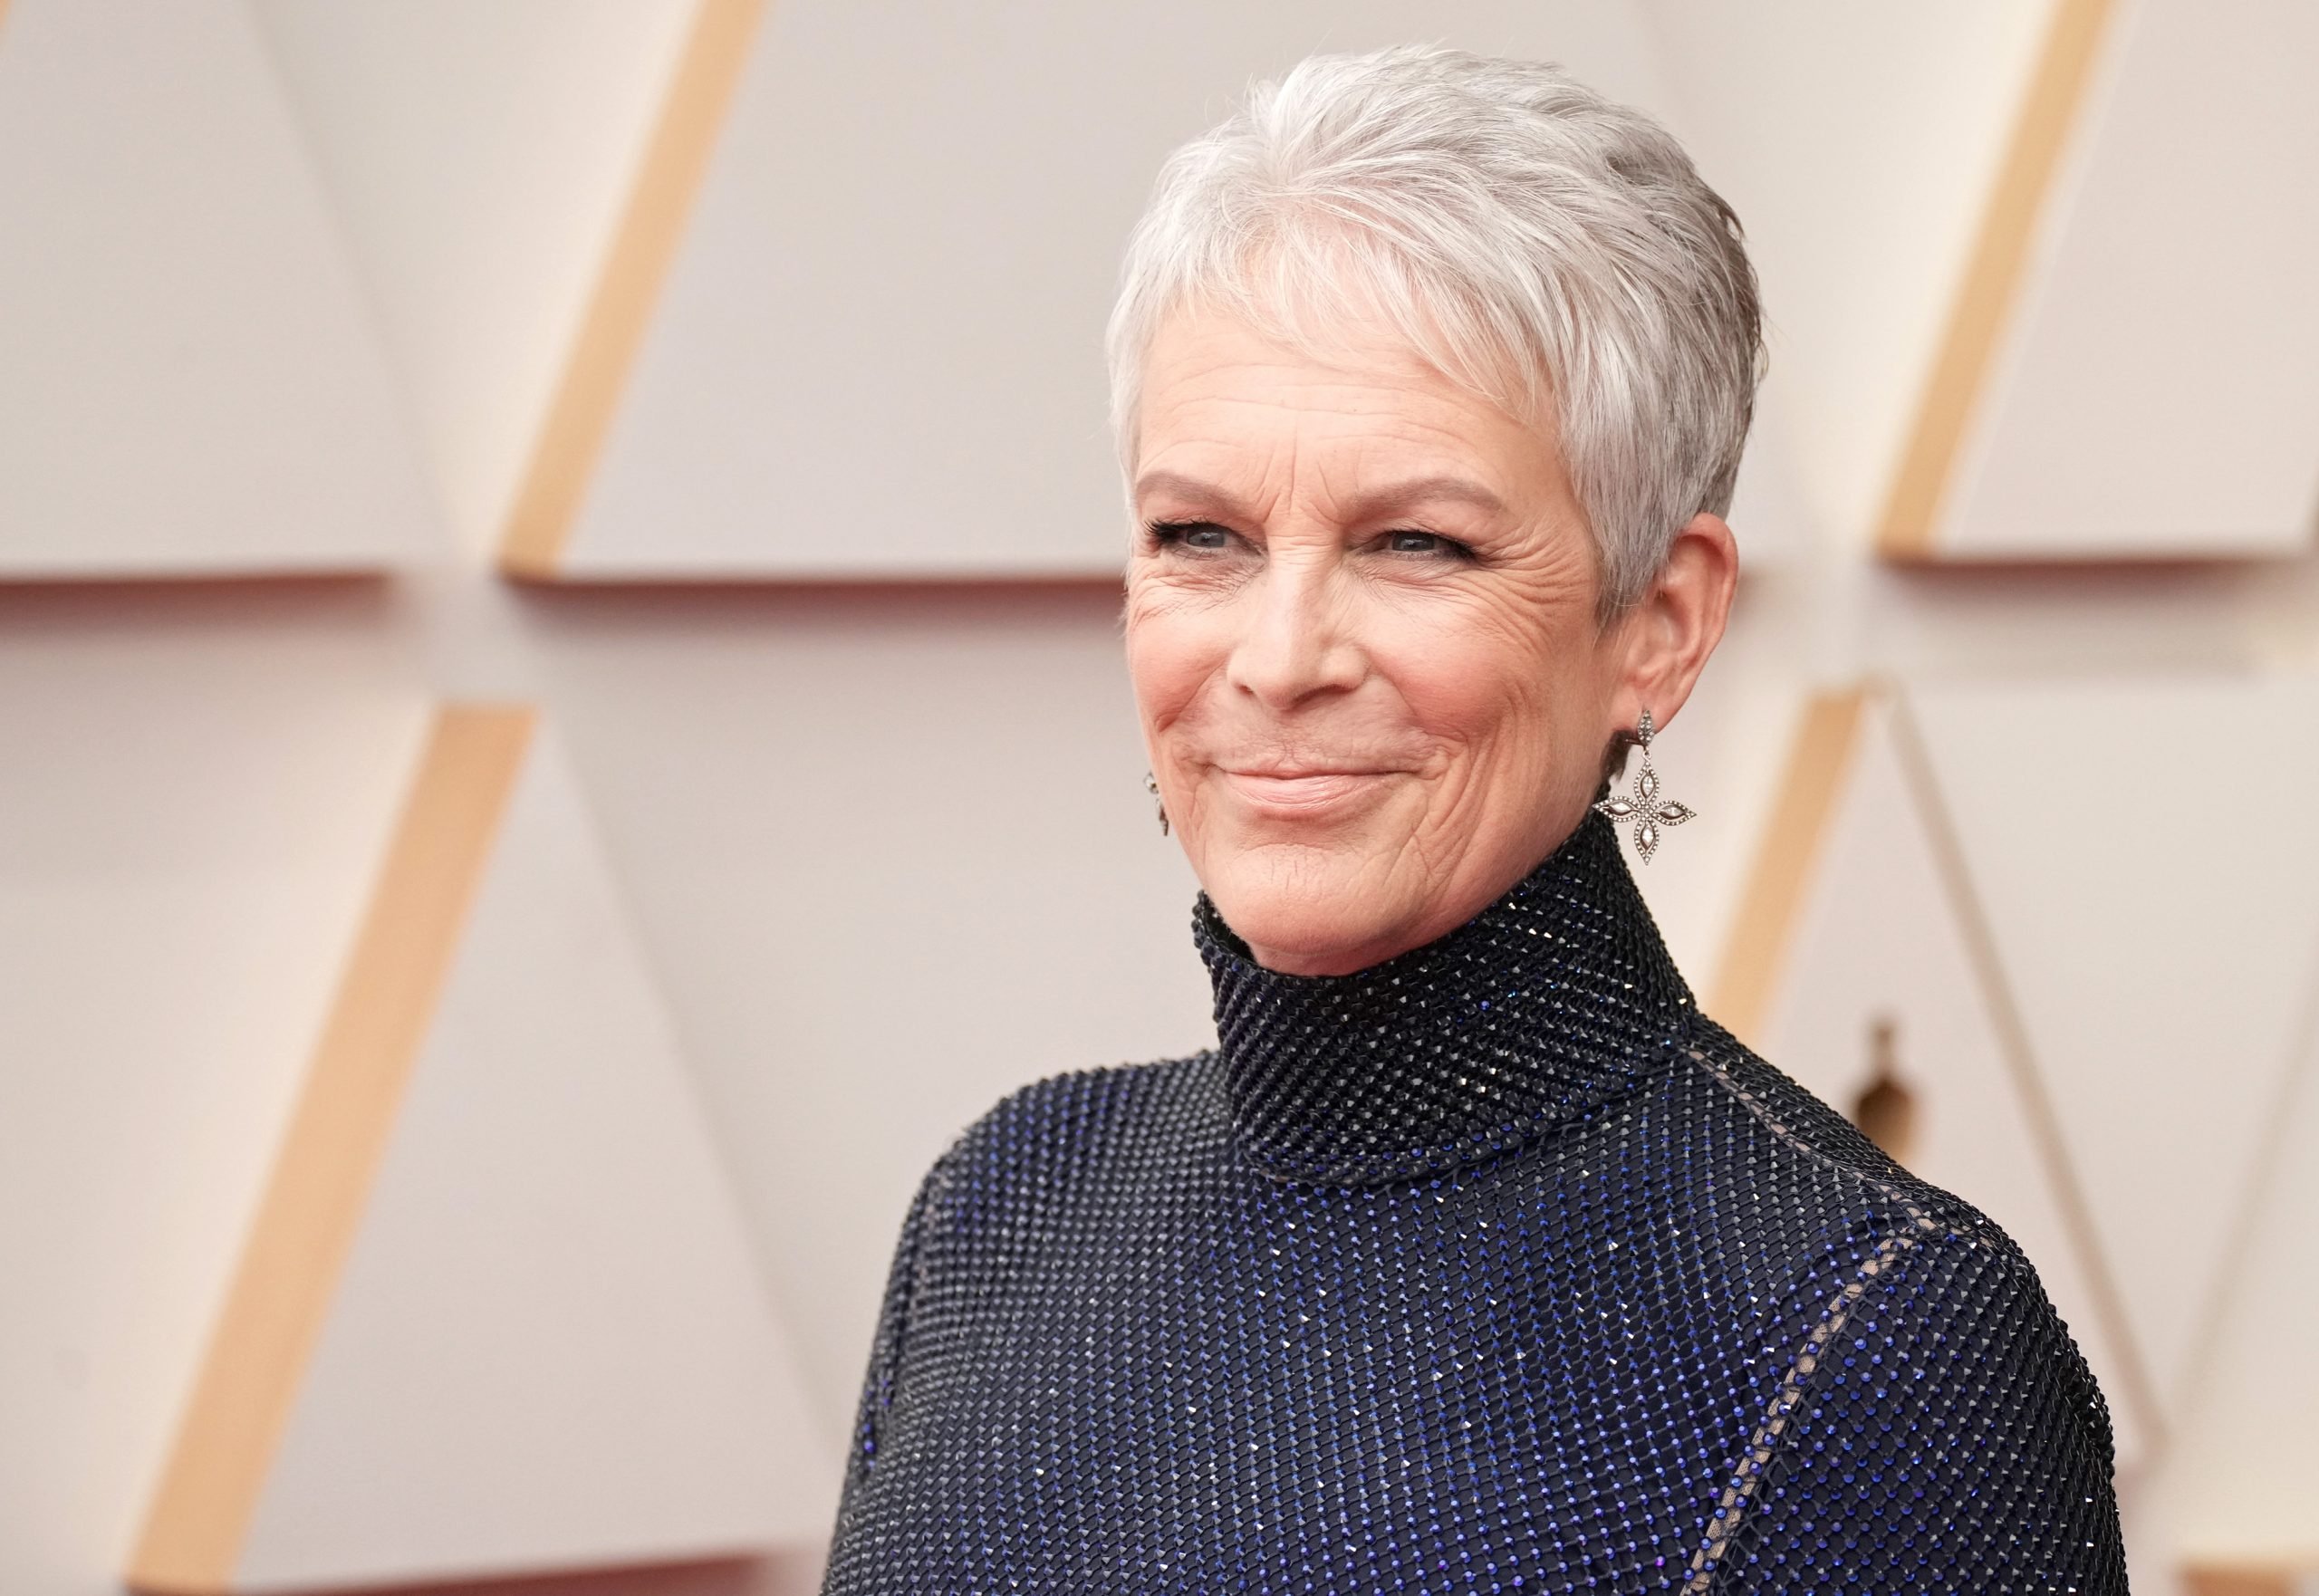 Oscars 2022: Jamie Lee Curtis Revealed She’d Love to Play a ‘One Piece’ Character for Netflix